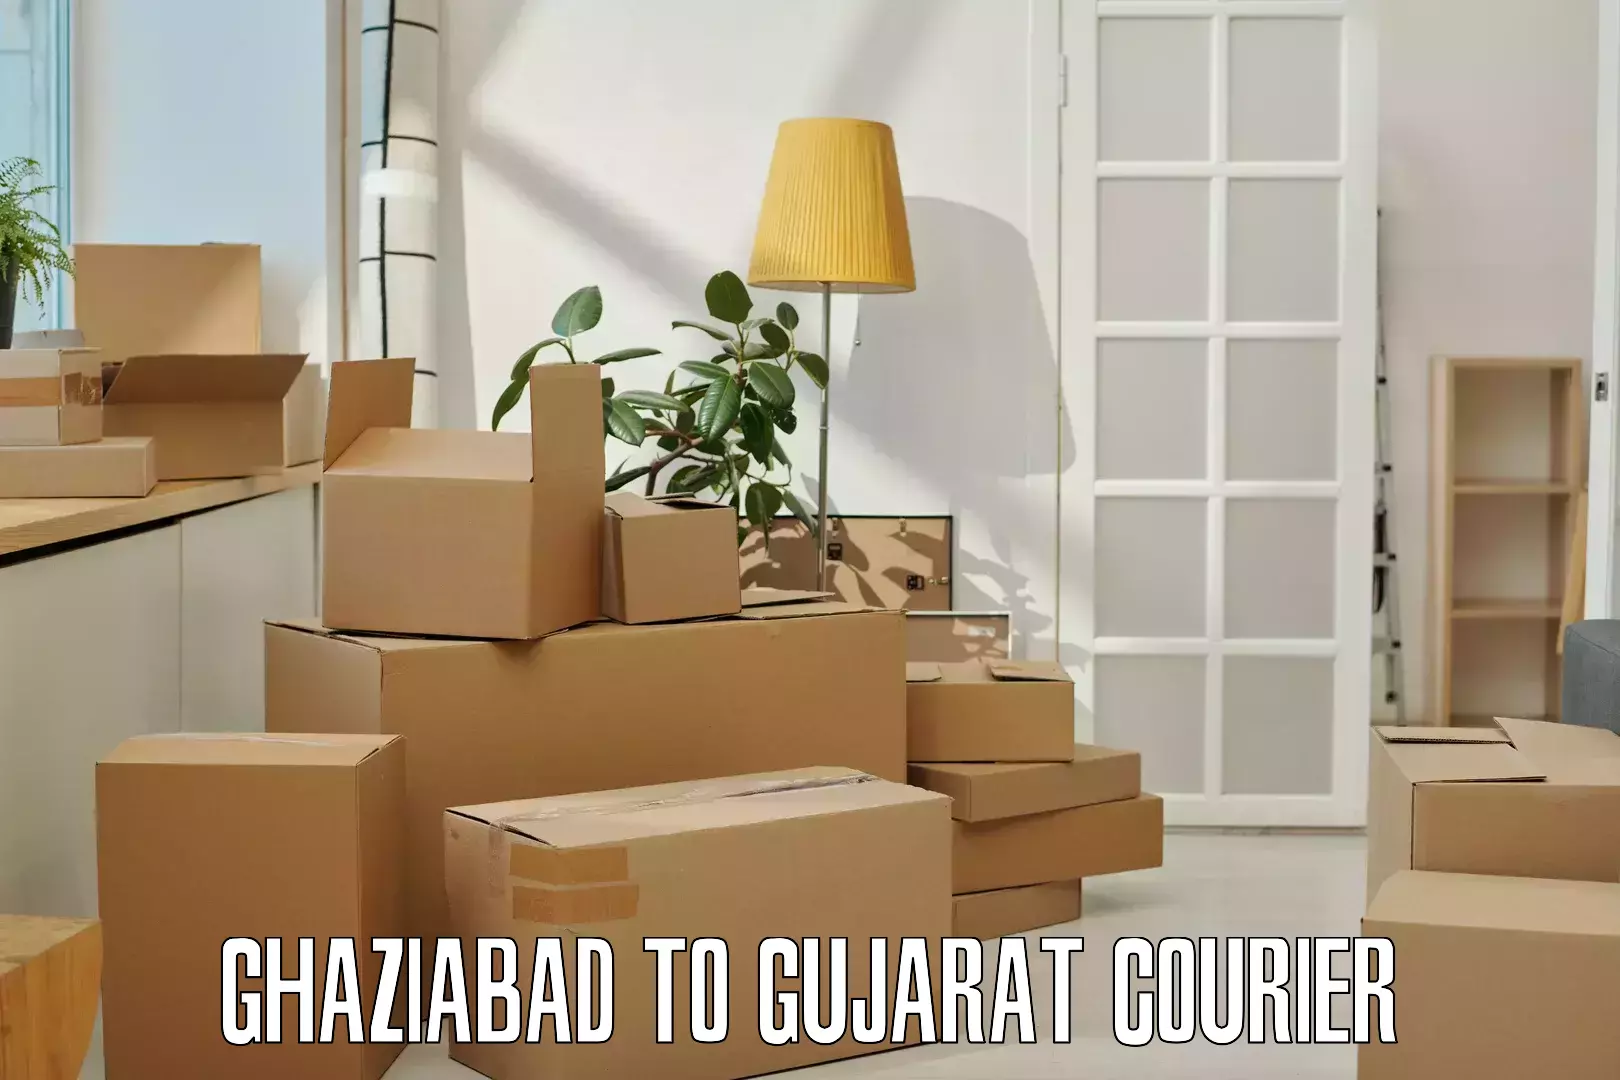 Parcel service for businesses Ghaziabad to GIDC